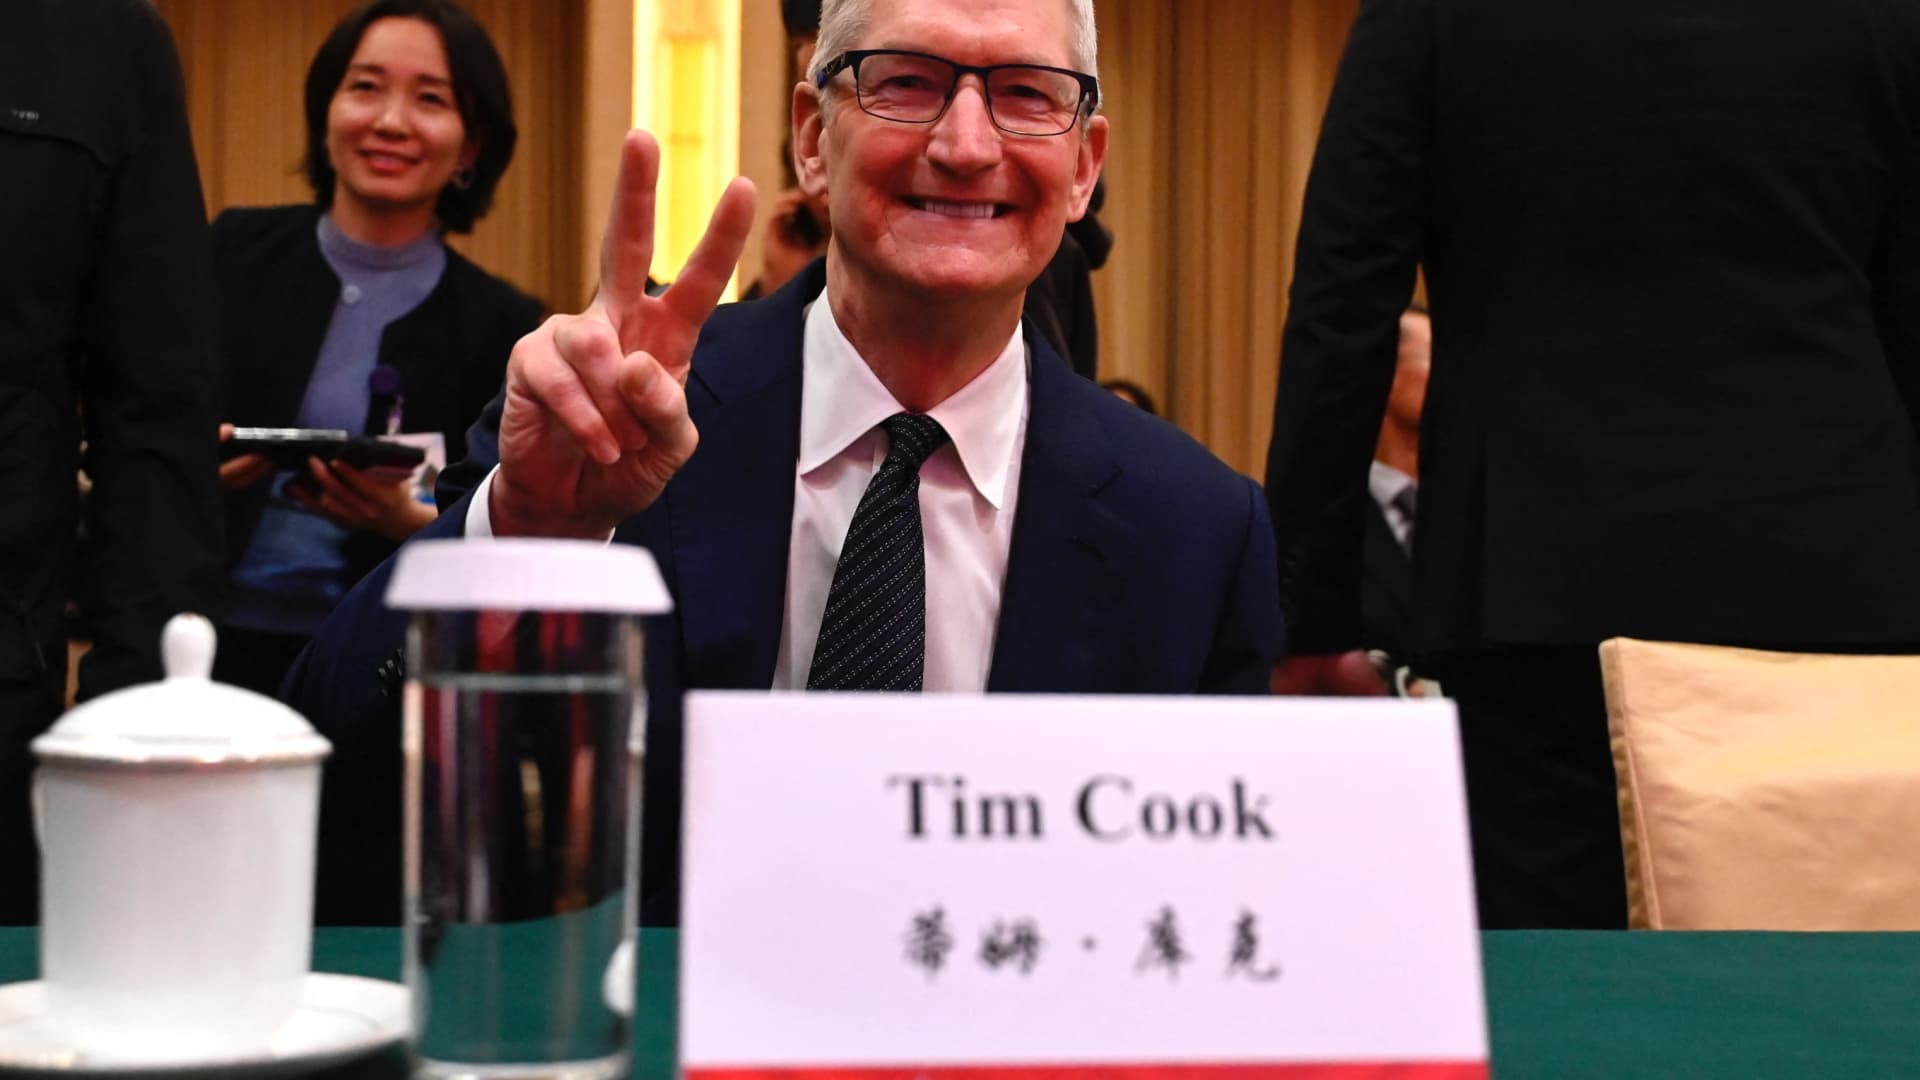 Apple to launch Vision Pro in China this year, Tim Cook says